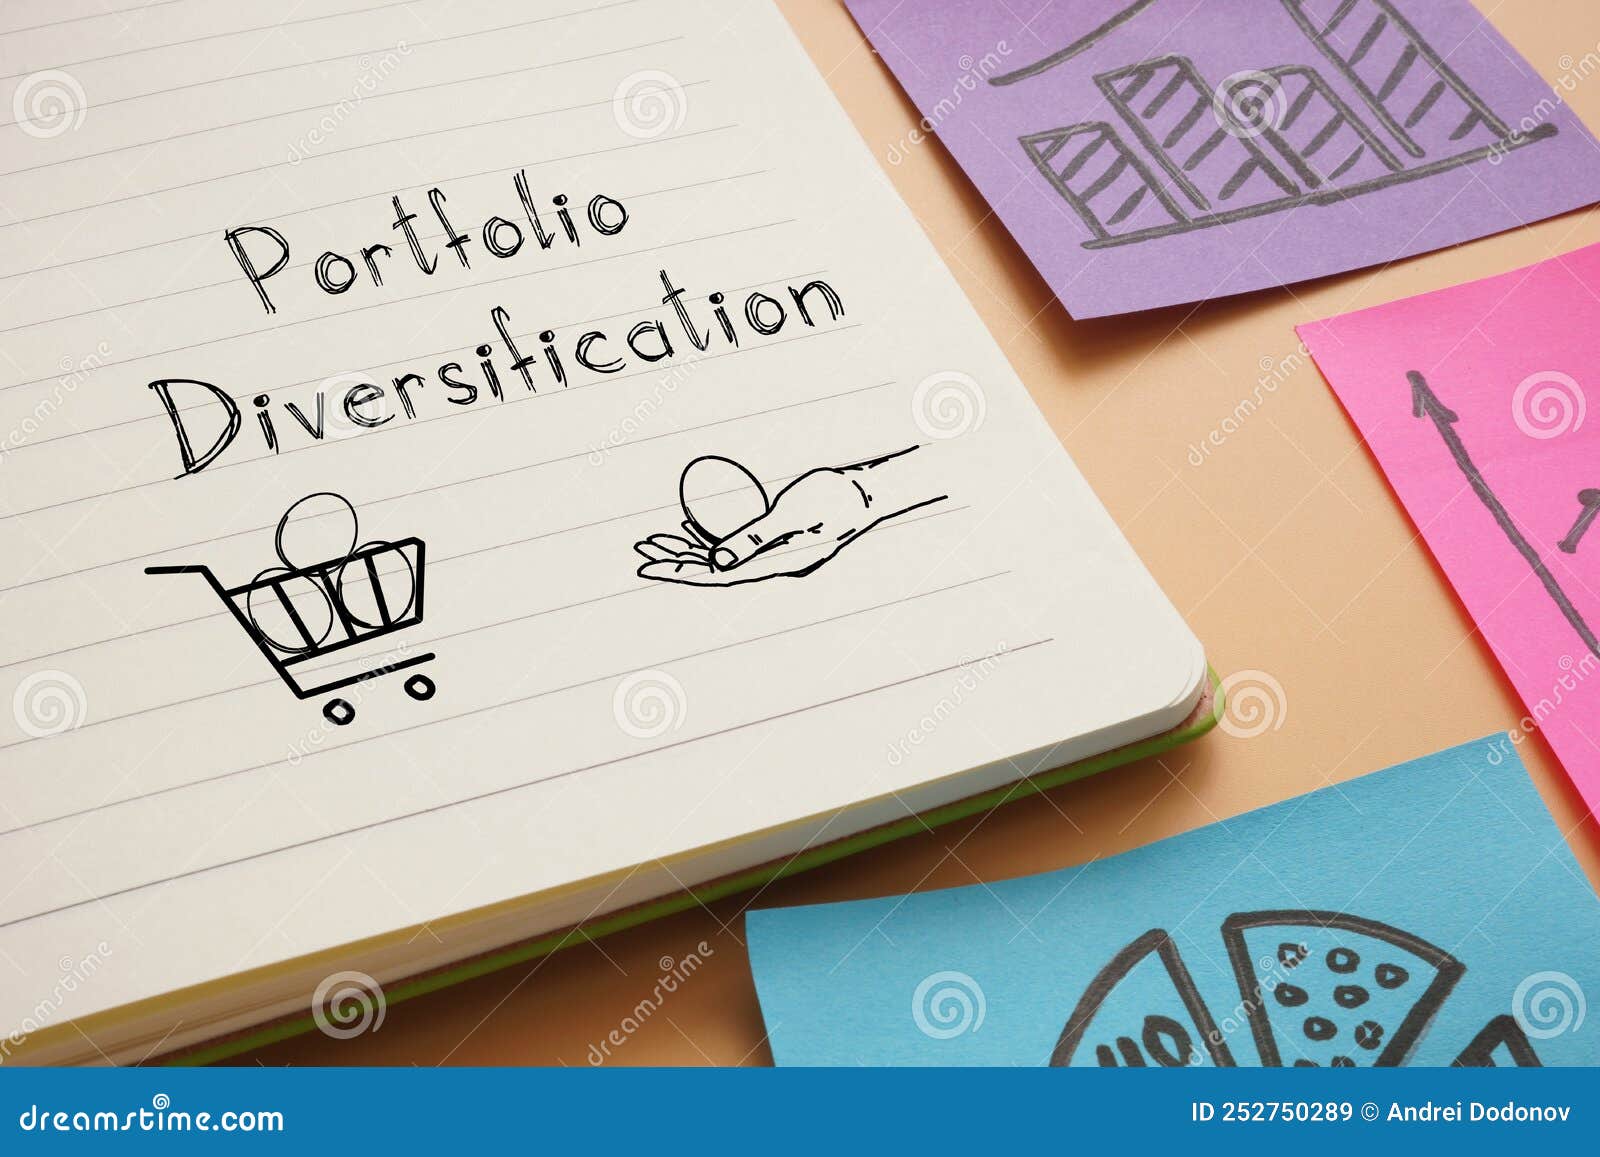 portfolio diversification is shown using the text